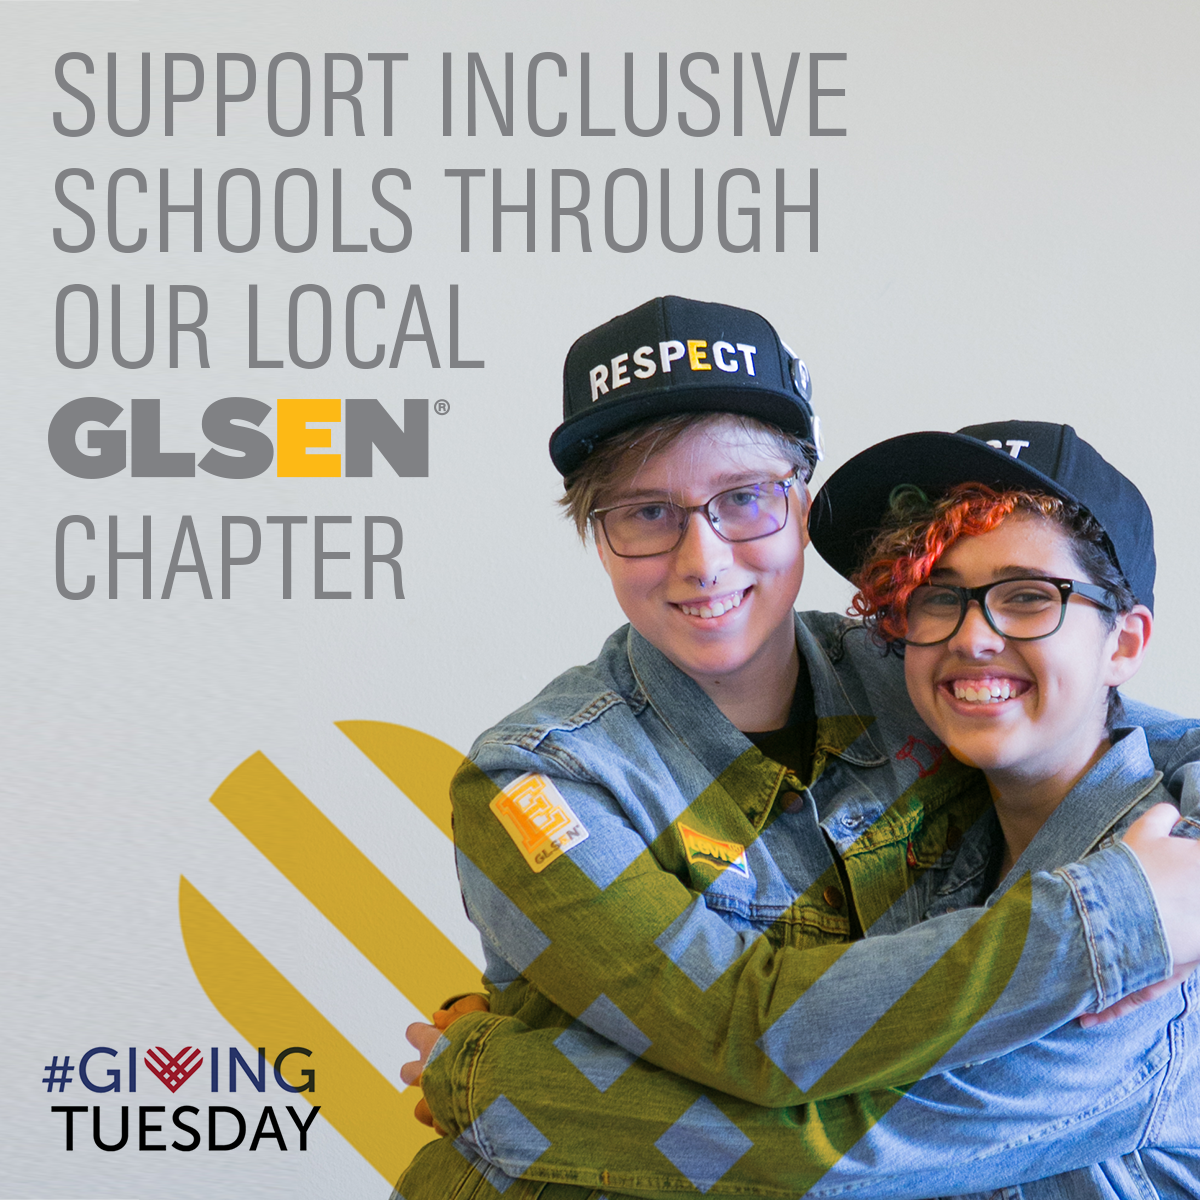 Two students wearing GLSEN hats hug. Text says: "Support Inclusive Schools Through Your Local GLSEN Chapter. #GivingTuesday"